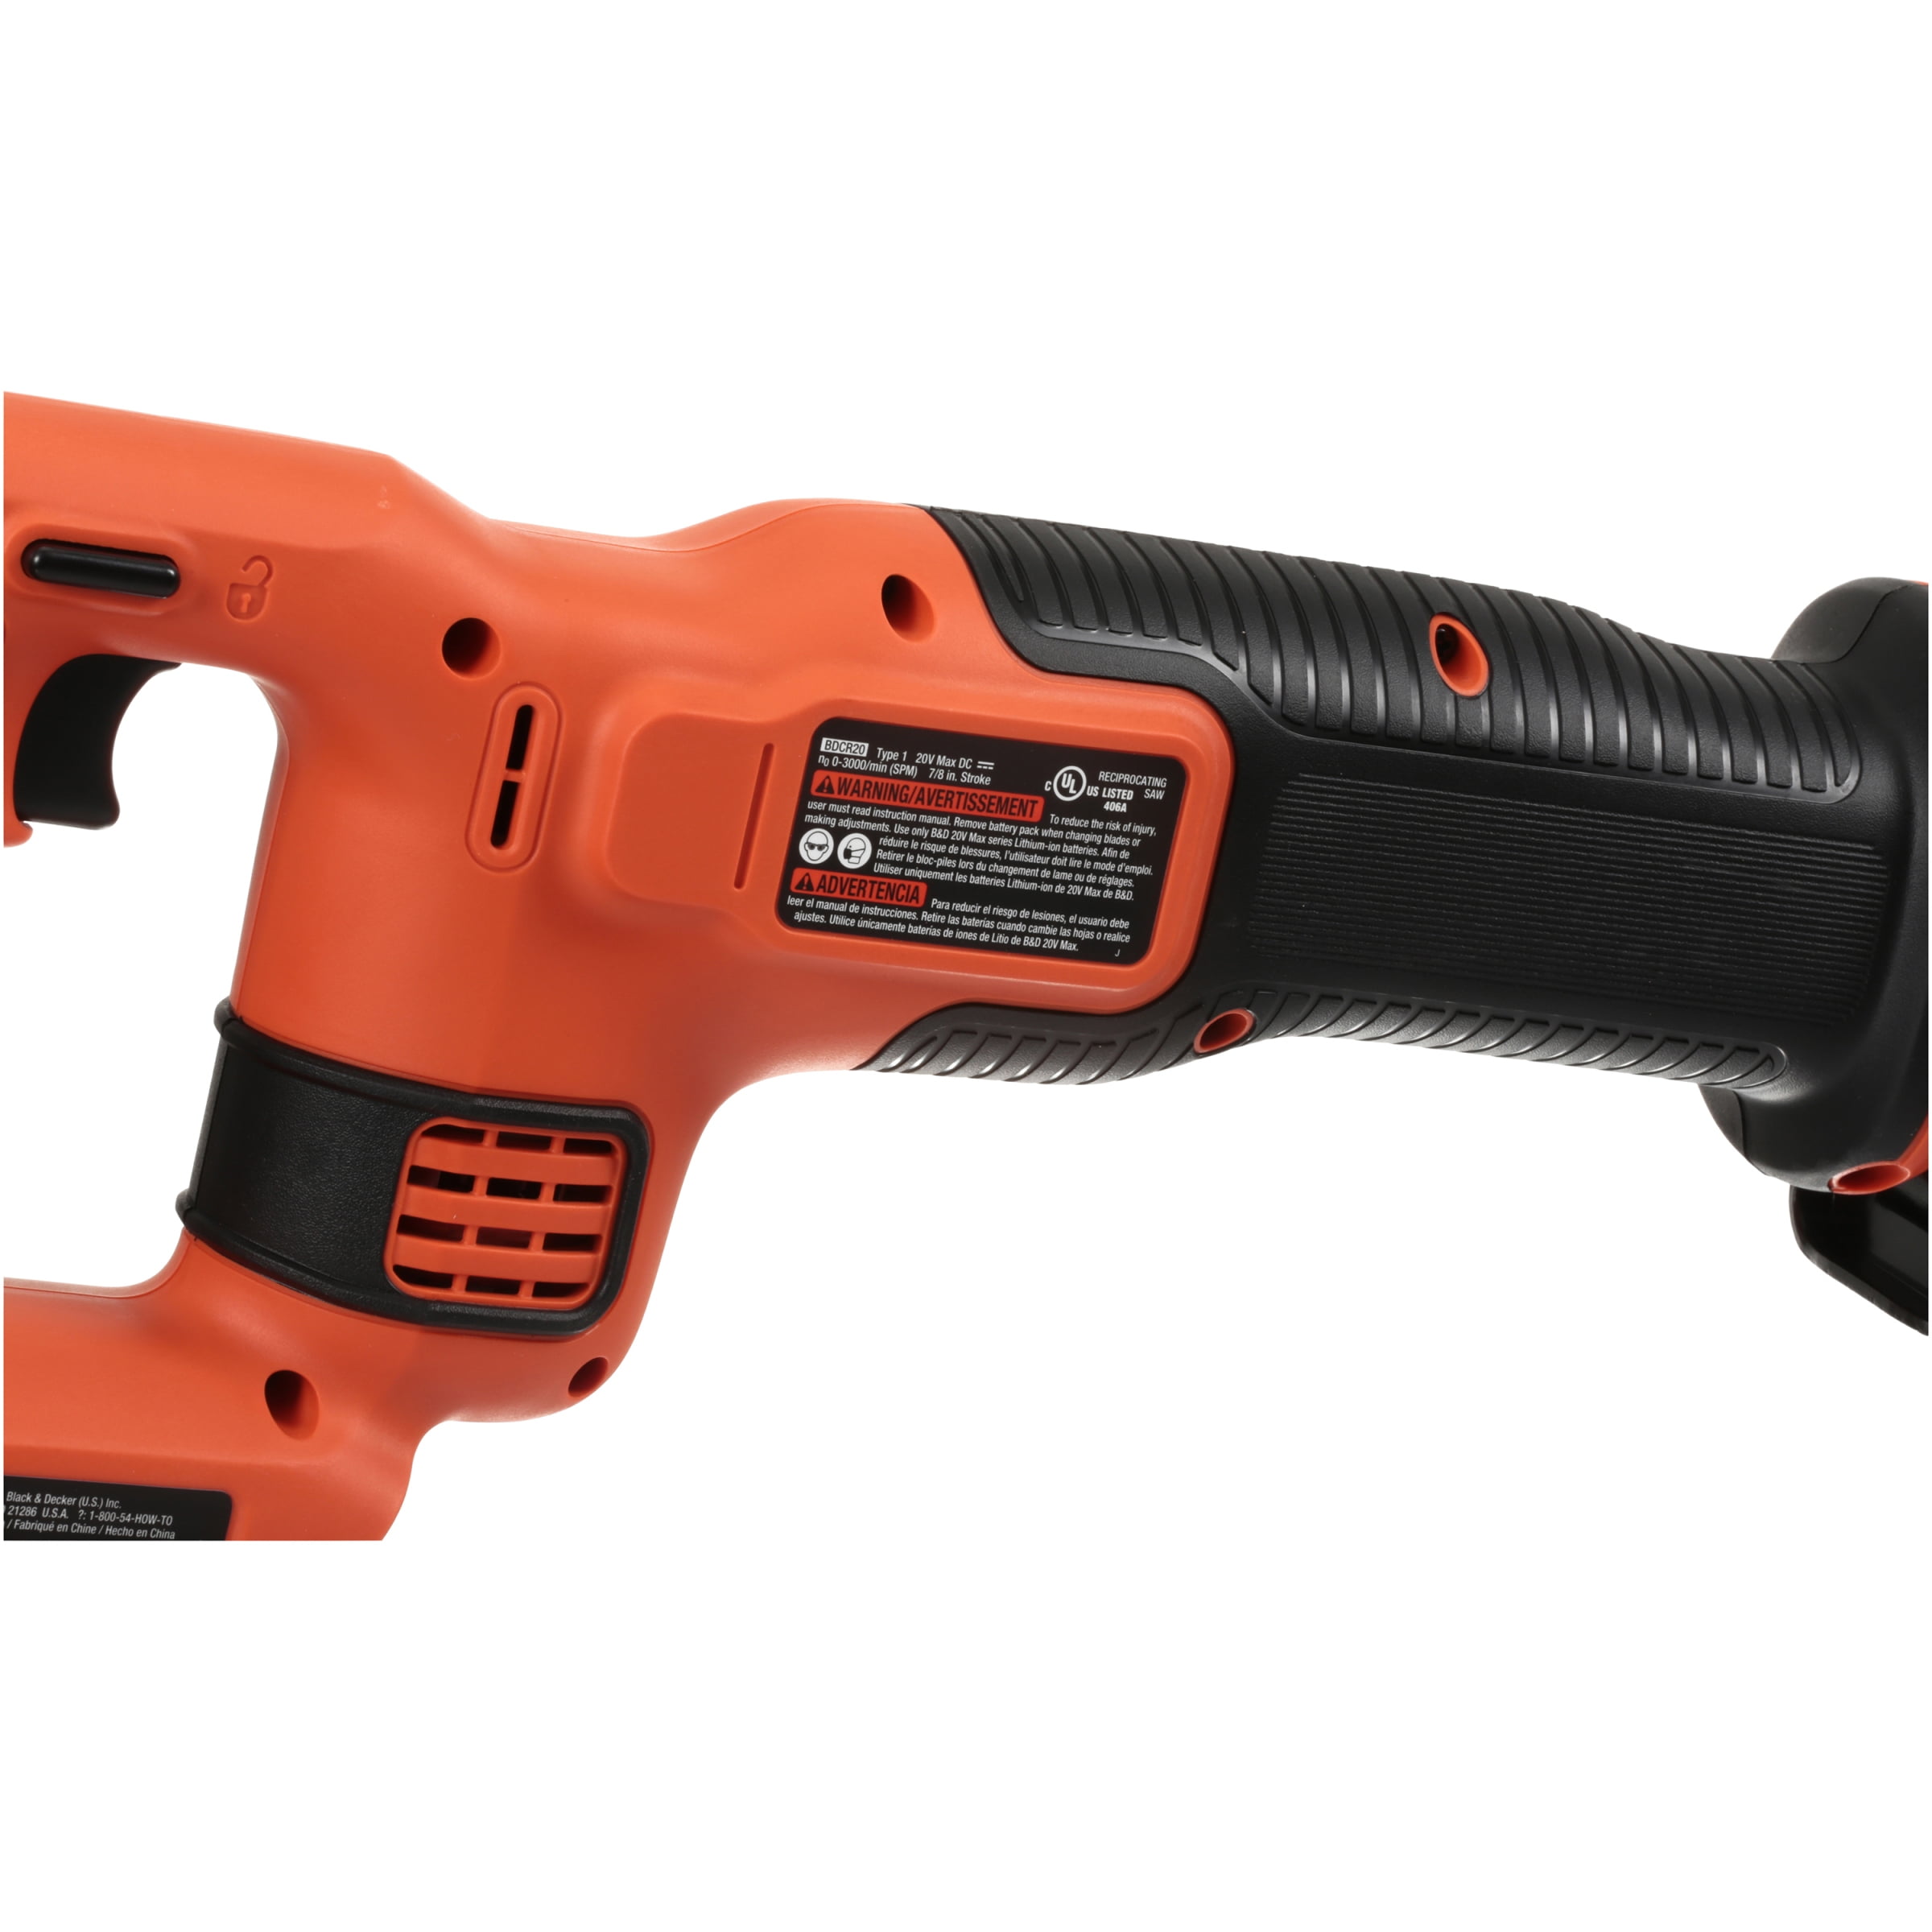 BLACK+DECKER 20V MAX* POWERCONNECT 7/8 in. Cordless Reciprocating Saw BDCR20B) Reciprocating Saw, tool only